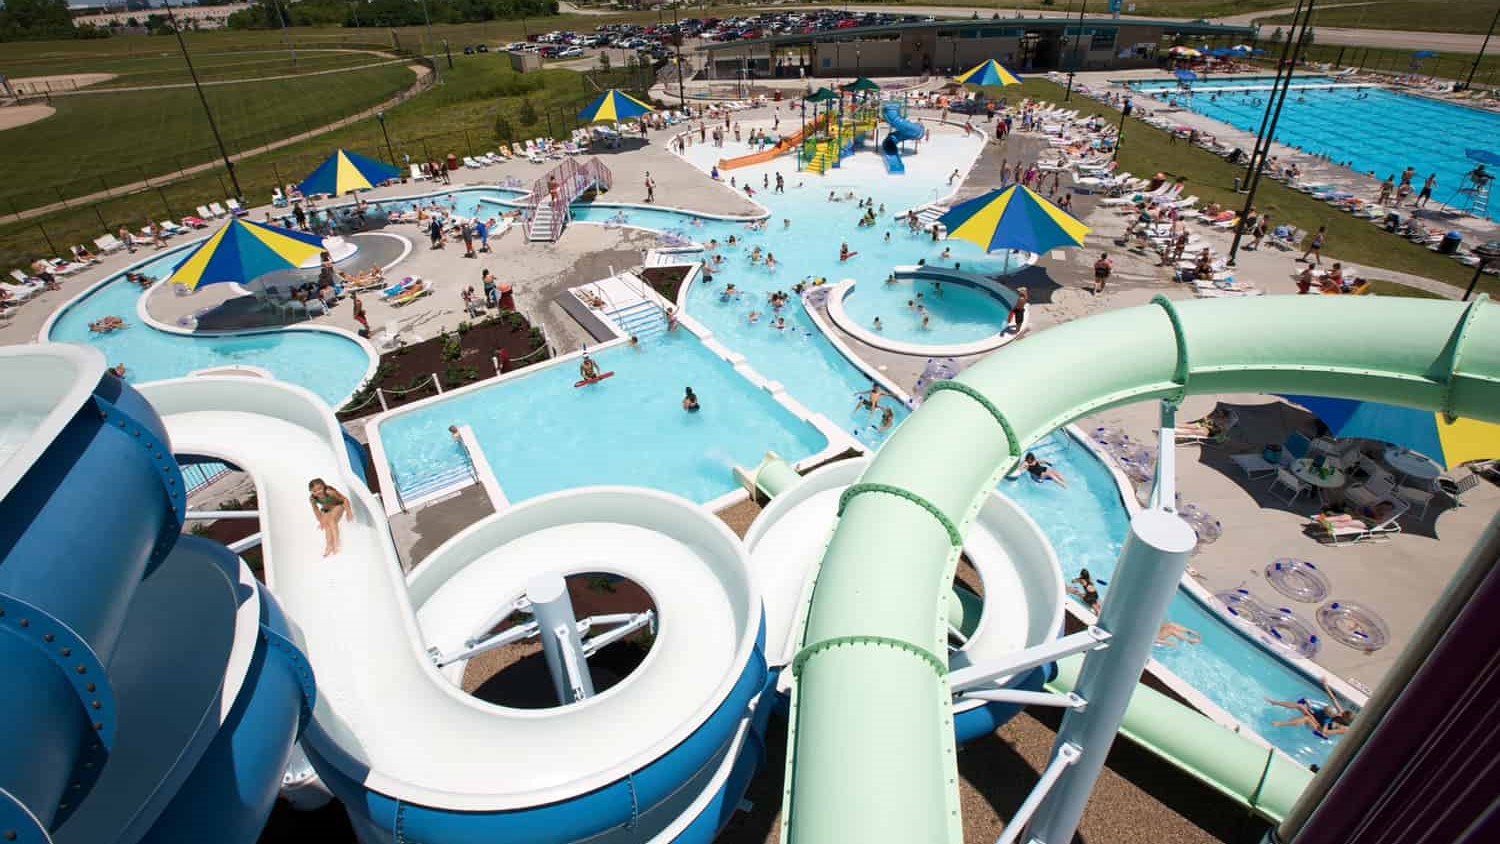 The Springs Aquatic Center is located across the street from The Reserve at Riverstone.